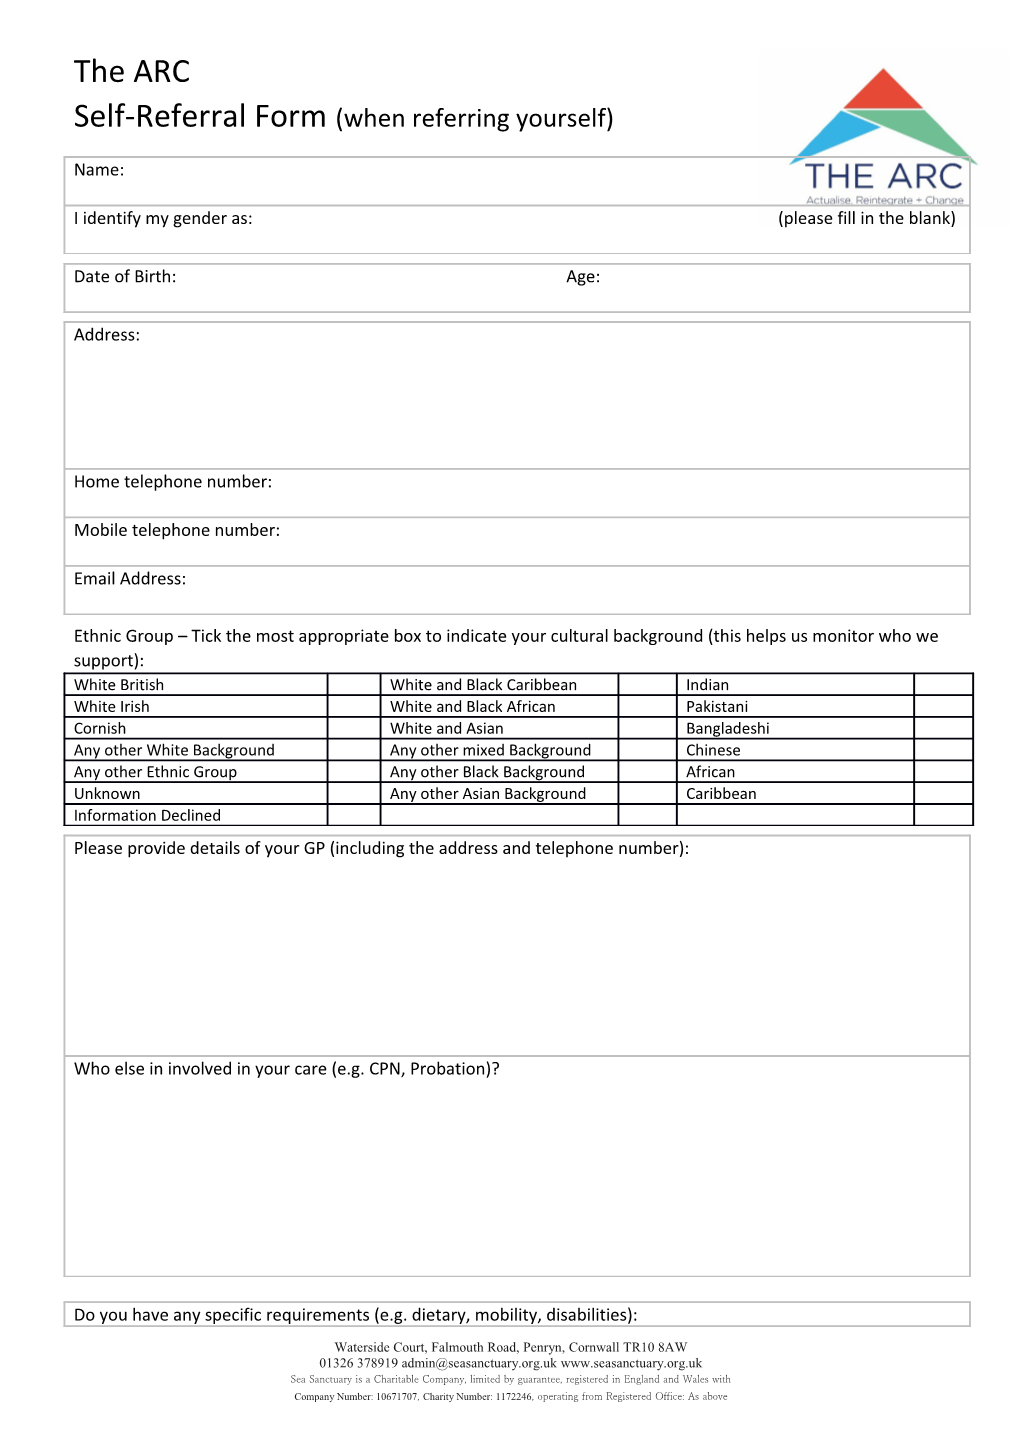 Self-Referral Form(When Referring Yourself)